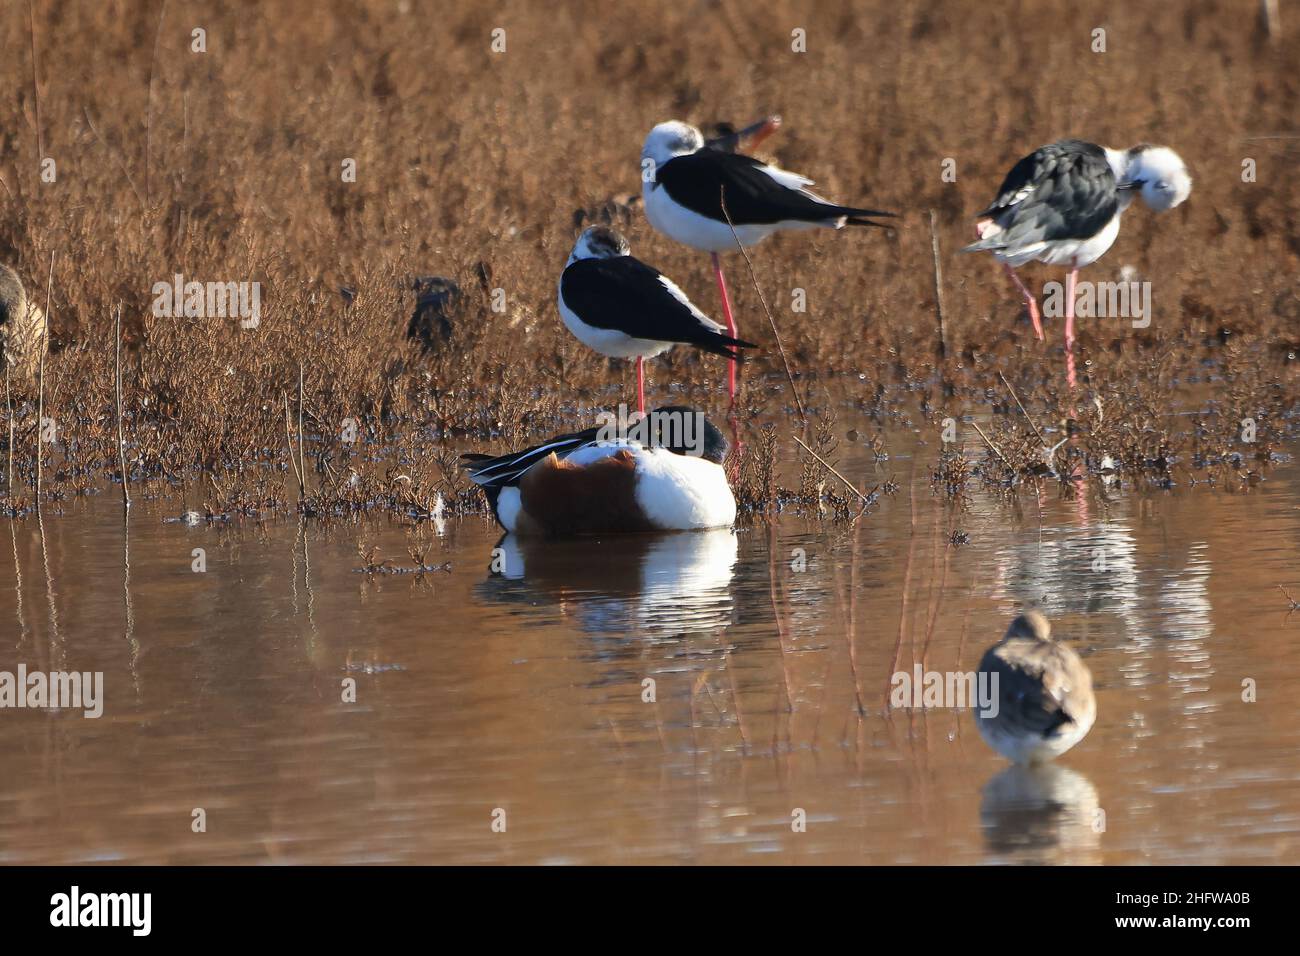 Male of Northern shoveler (Spatula clypeata) and other marshes birds are Relaxing in the shore of a pond. Only Male of Northern shoveler is in focus Stock Photo